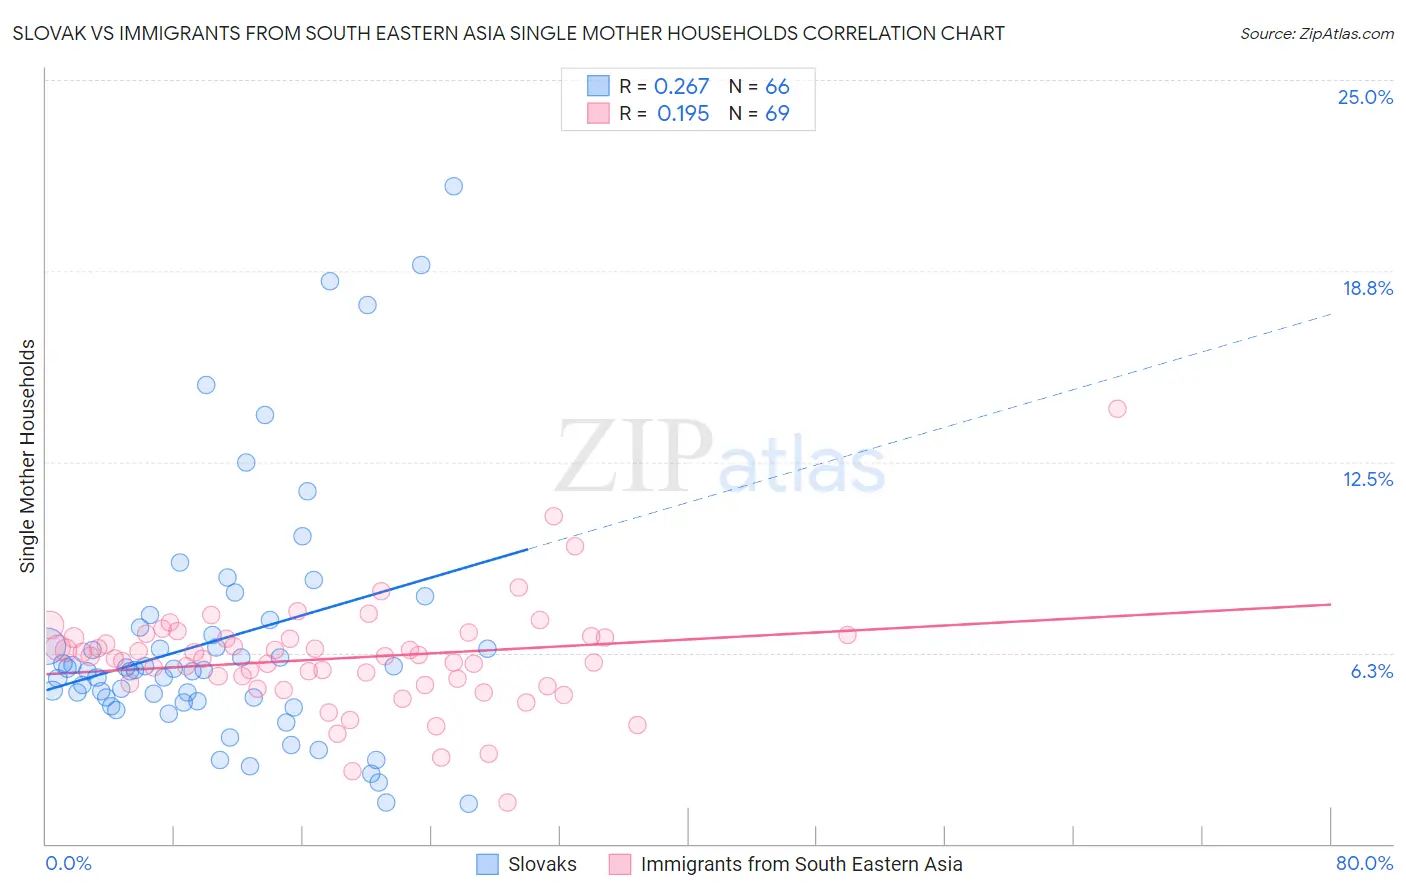 Slovak vs Immigrants from South Eastern Asia Single Mother Households